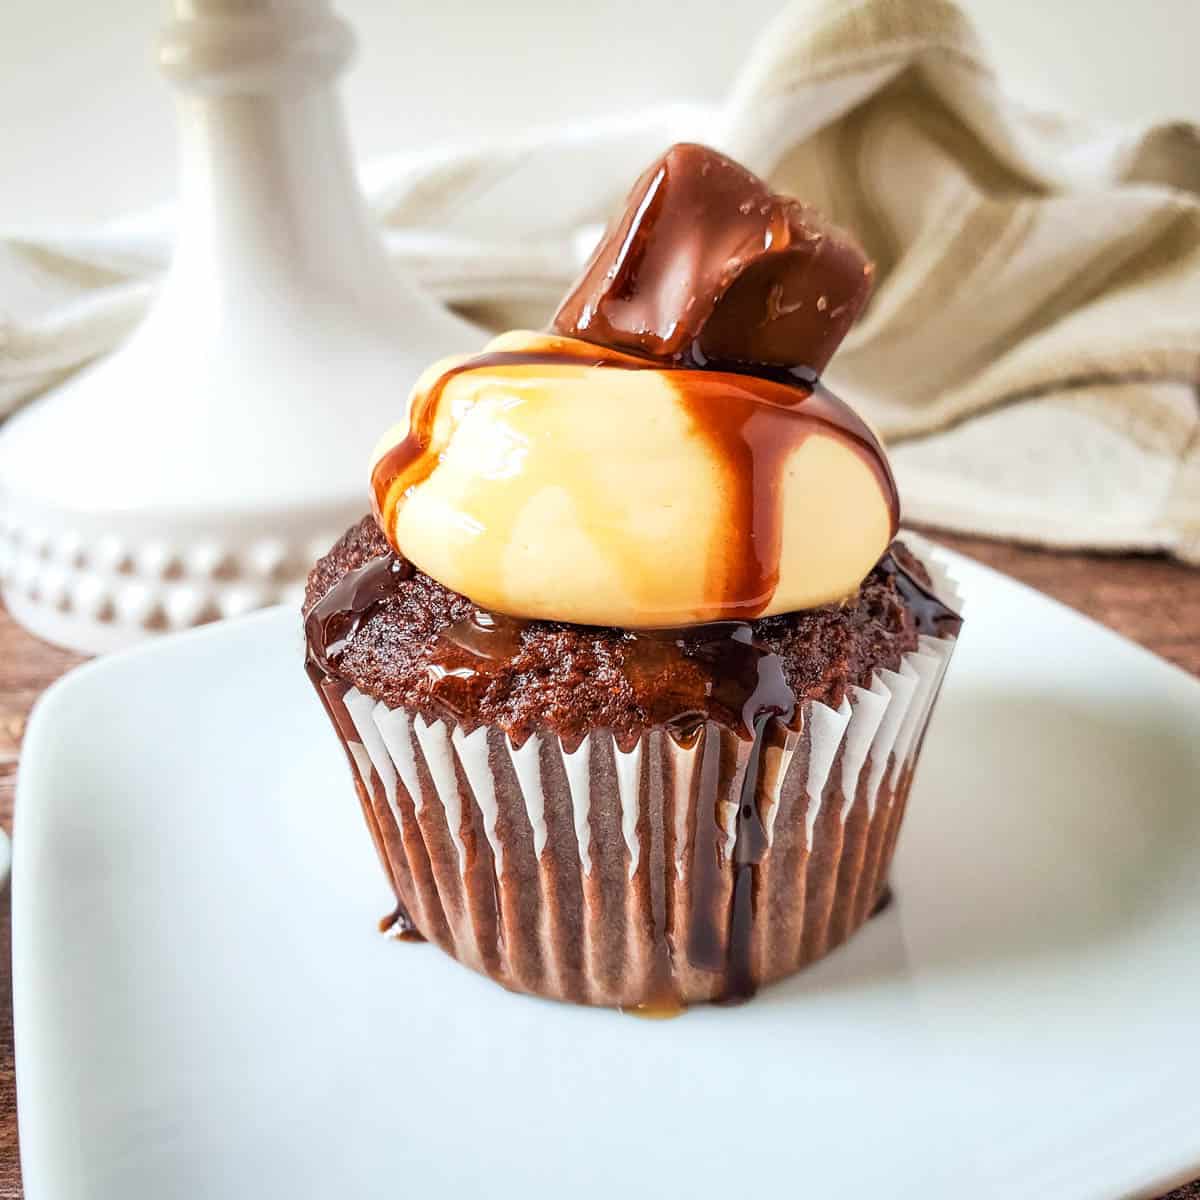 A snickers cupcake made using cake mix with caramel frosting, caramel sauce, chocolate sauce, and snickers topping.